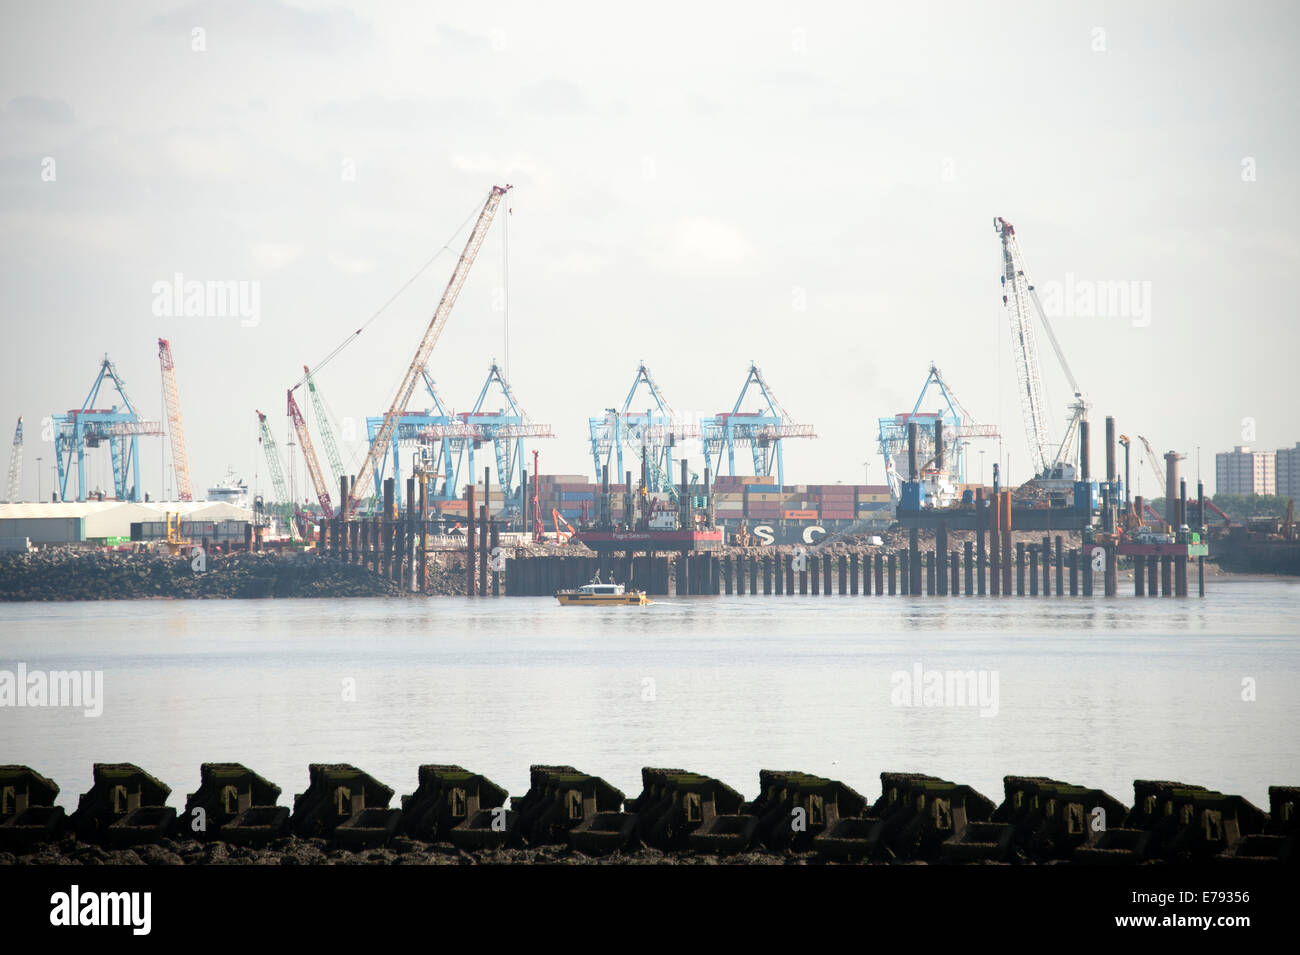 New Liverpool Seaforth Container Terminal Under construction Stock Photo